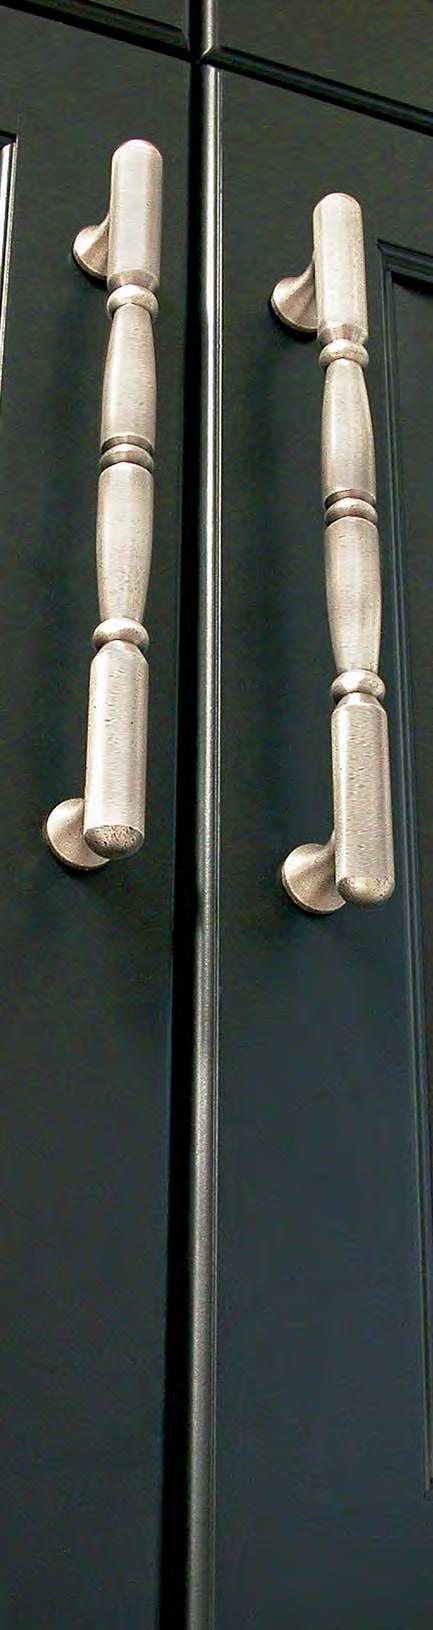 appliance pulls our solid brass appliance pulls will transform your refrigerator, oven, 214 215 240 Series 241 Series Style C-C Proj Dia OA 214 8 2 3/8 1 15 Custom lengths available.